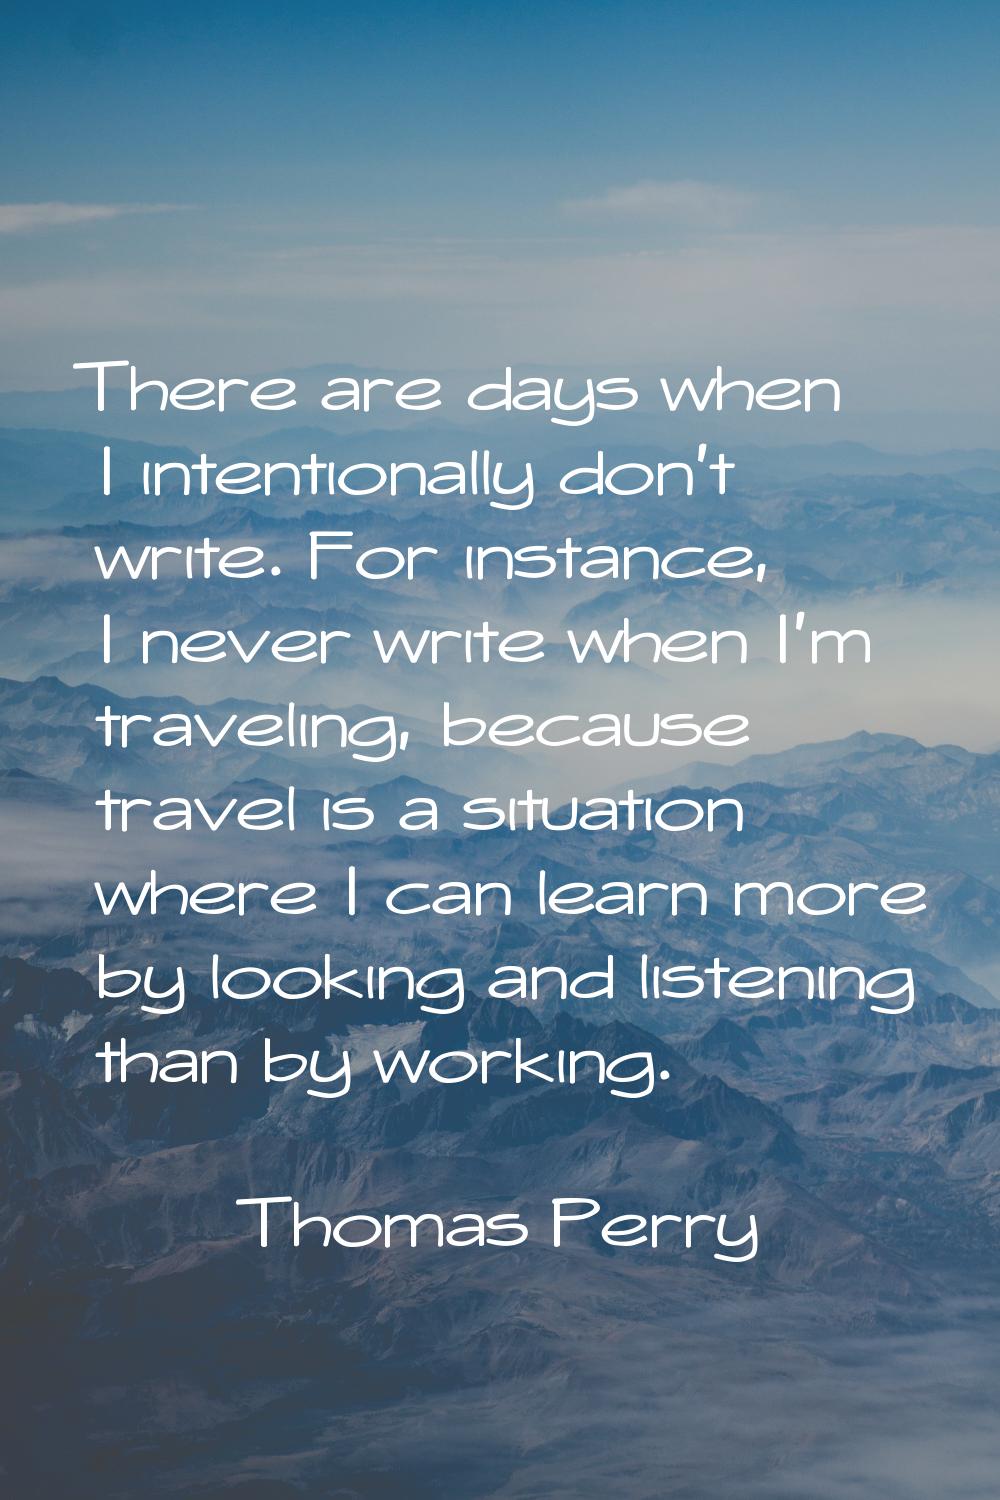 There are days when I intentionally don't write. For instance, I never write when I'm traveling, be